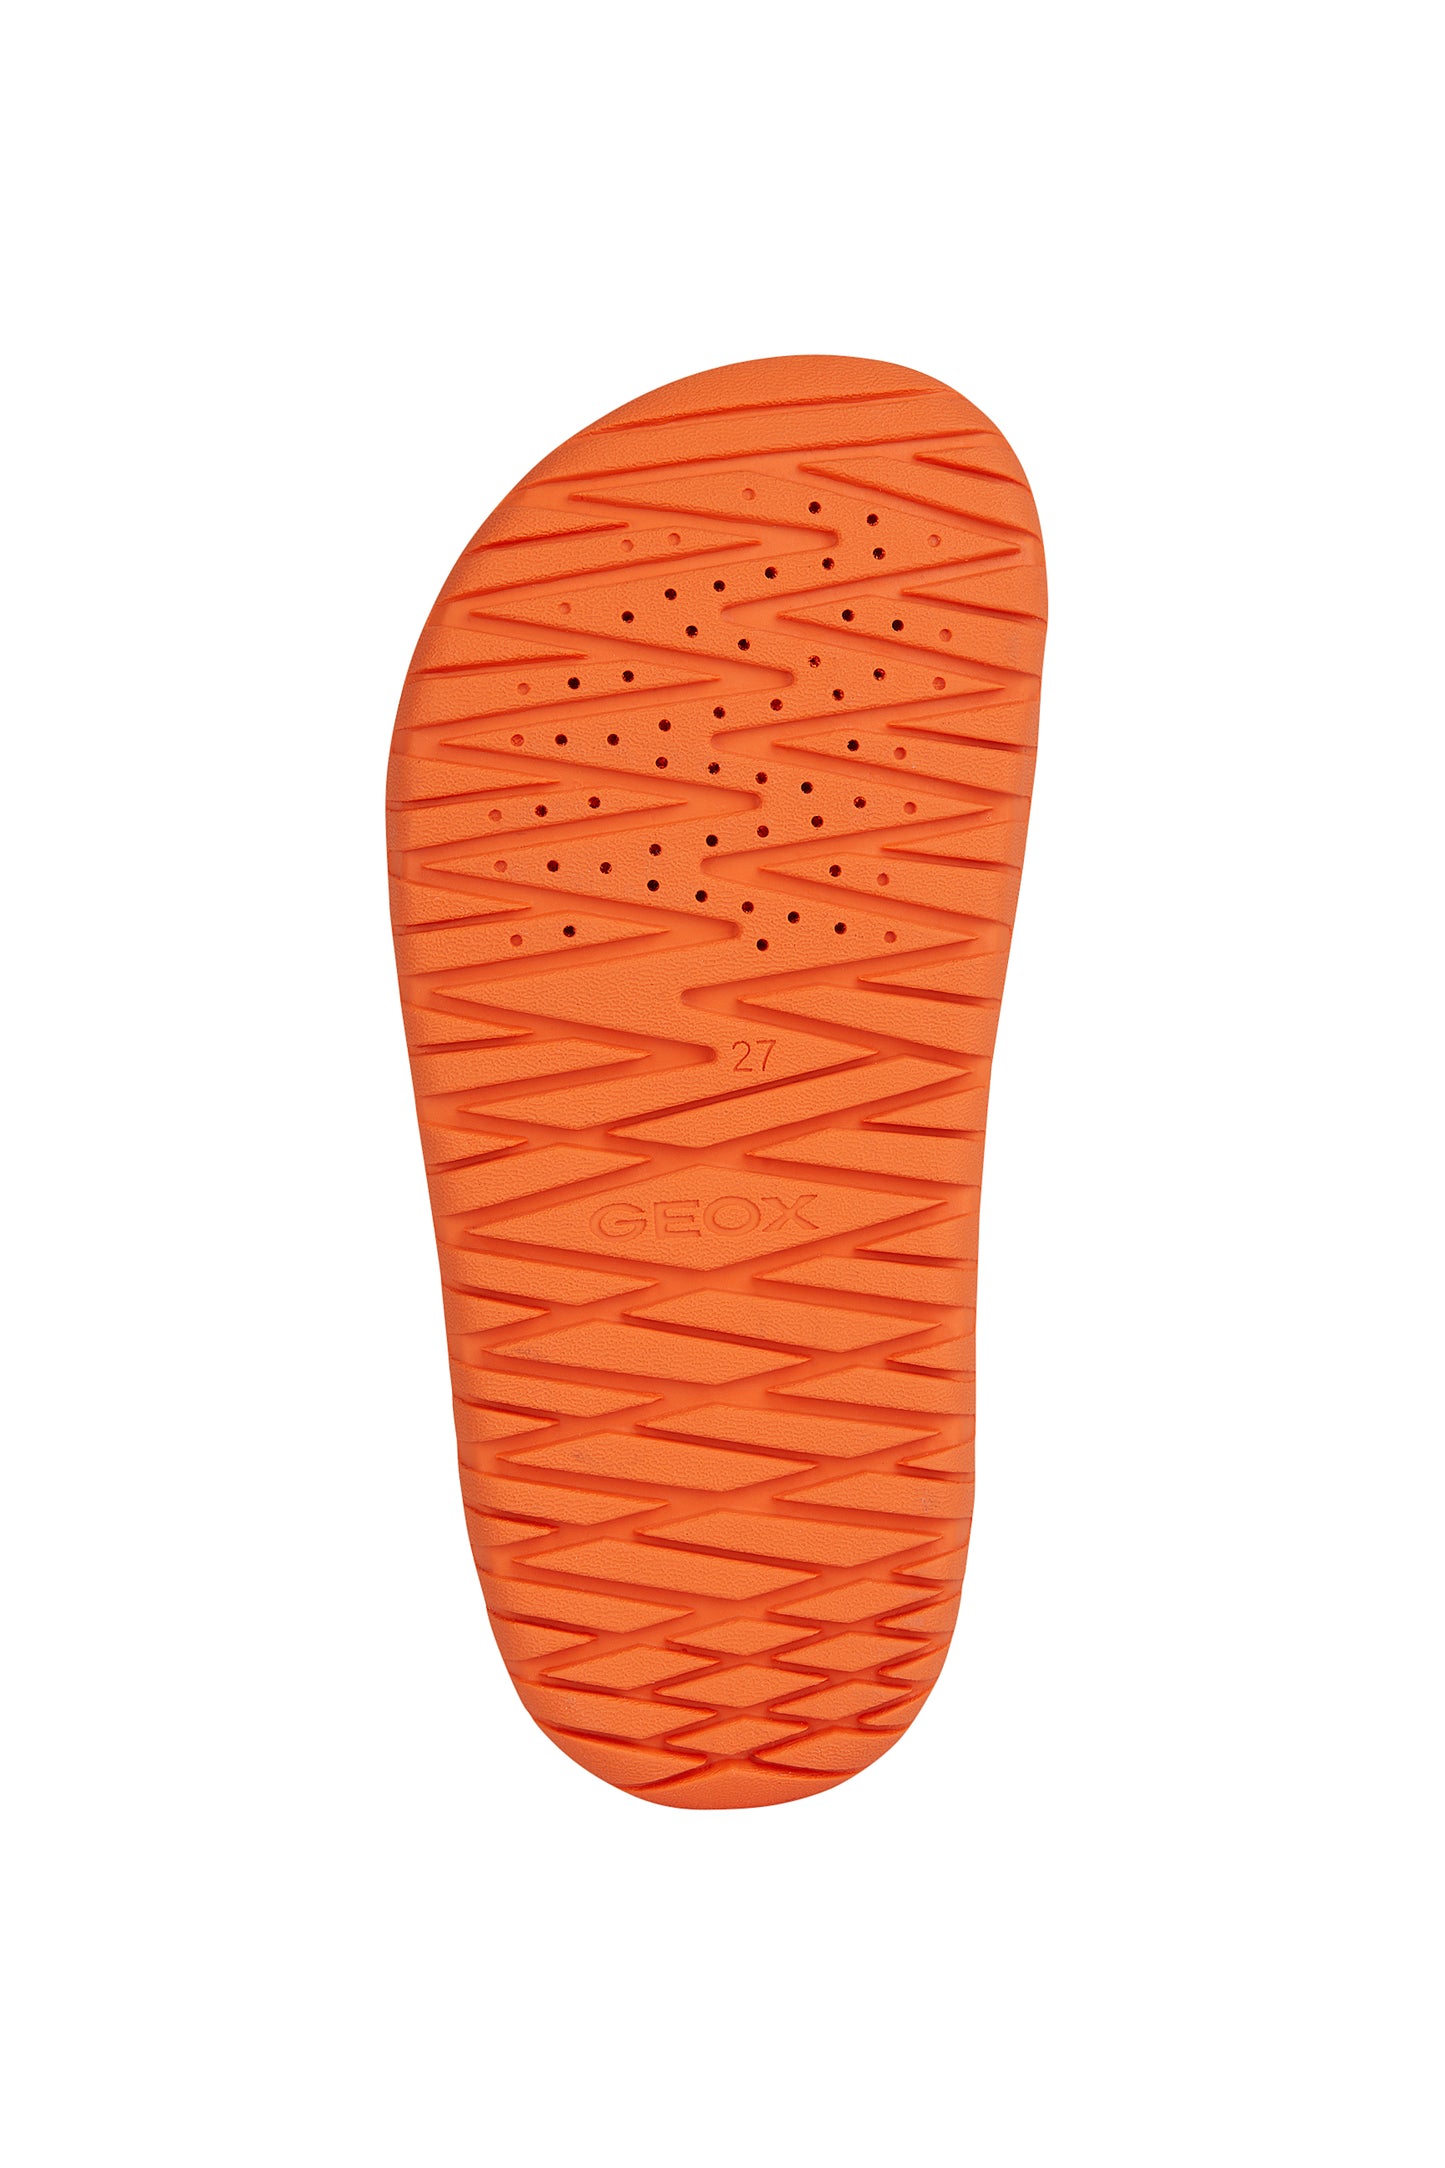 A unisex open toe synthetic water friendly sandal by Geox. Style Fusbetto in orange with two velcro fastenings. Sole view.